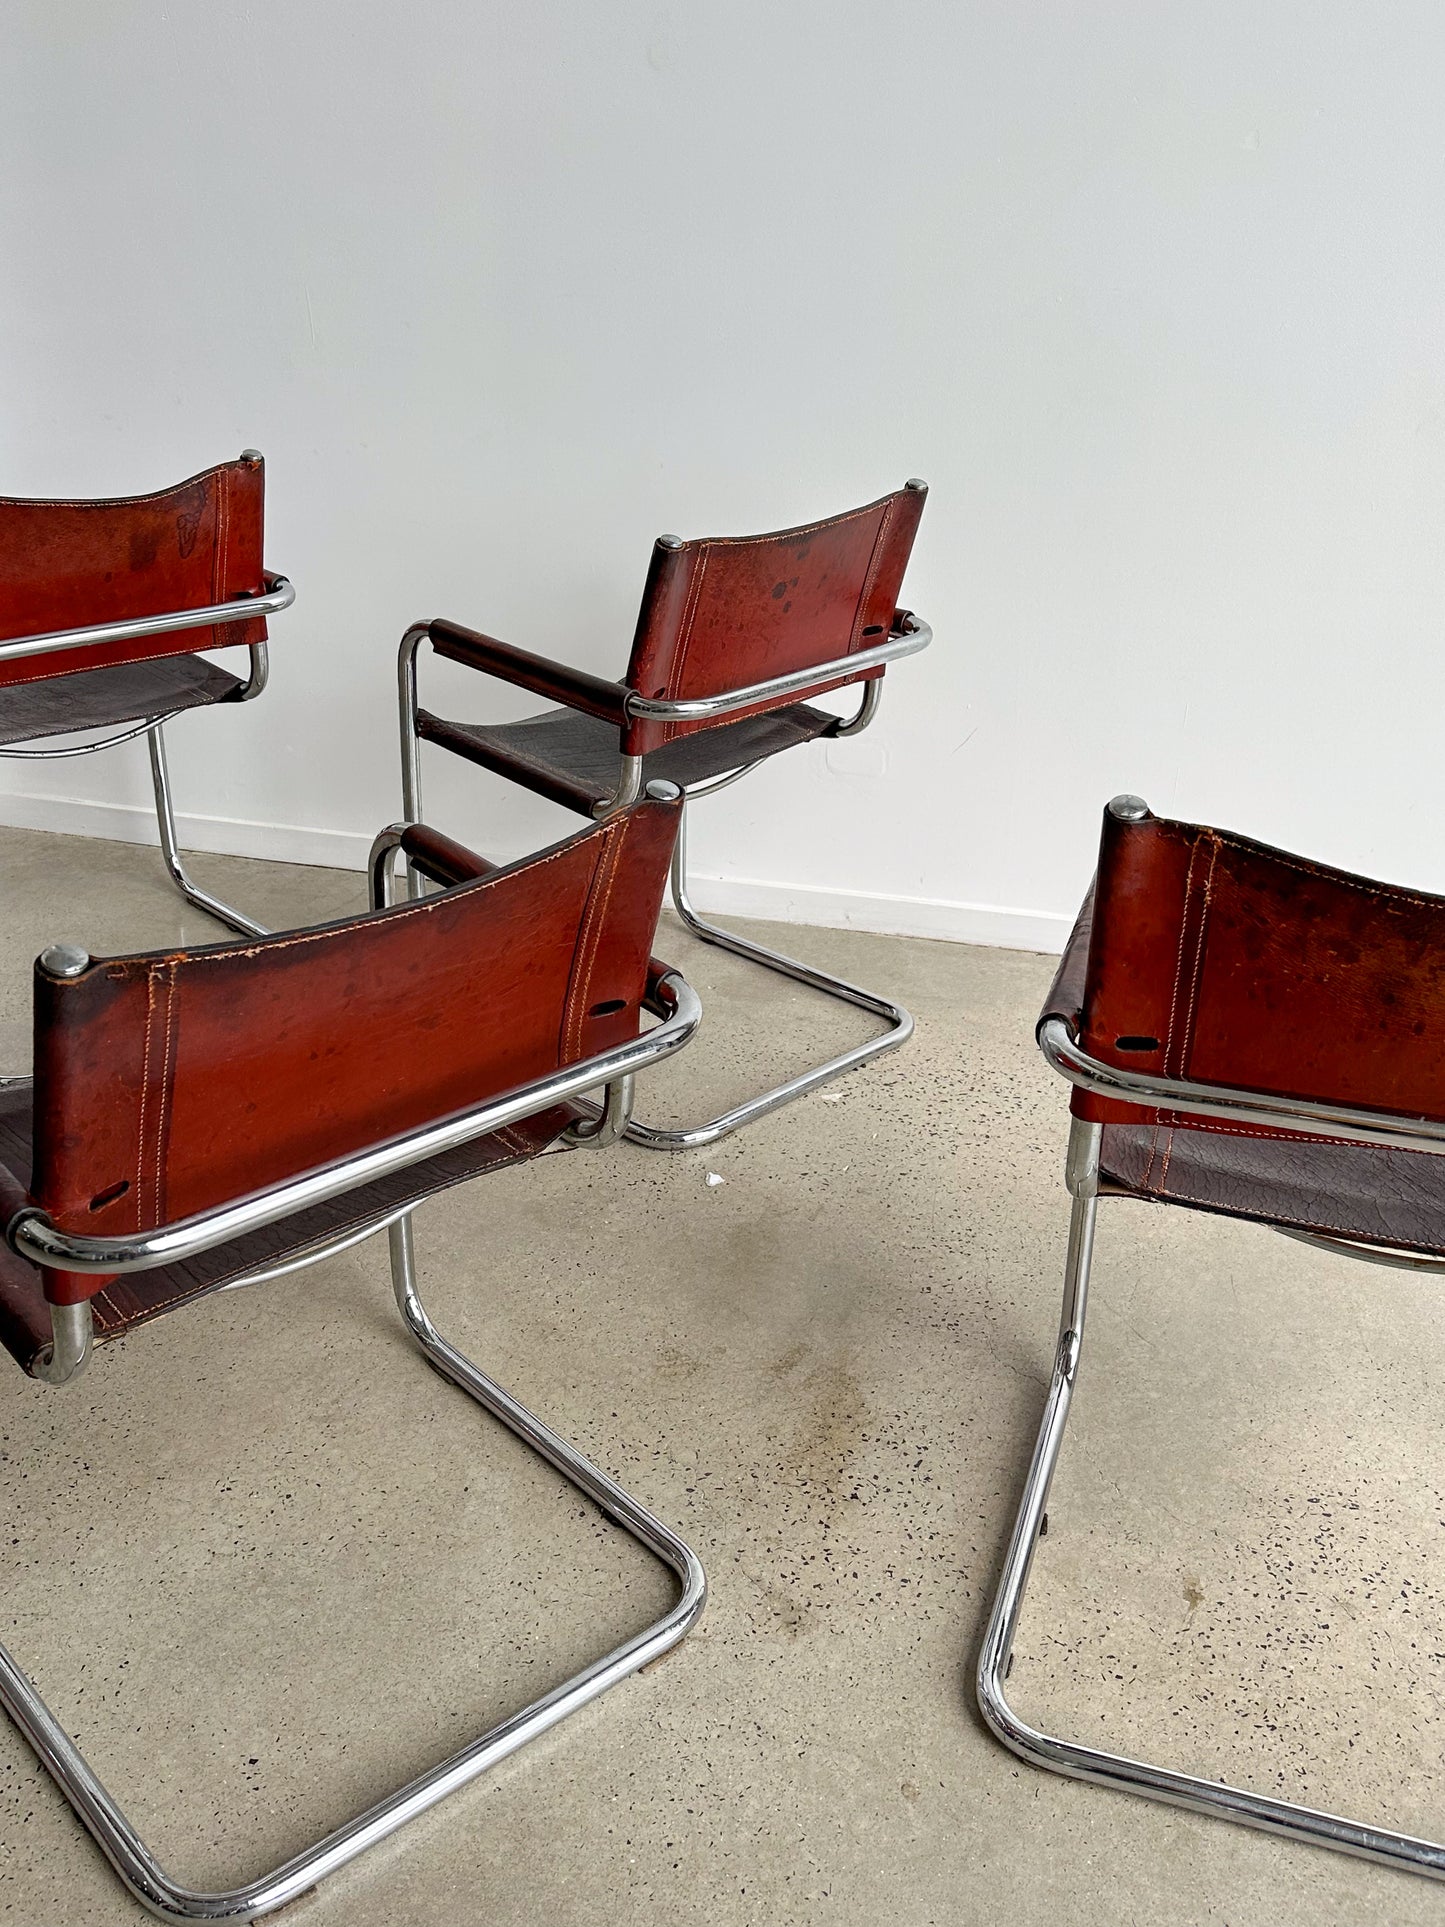 S34 Marcel Breuer Brown Leather & Chrome Set of Six Chairs 1970s